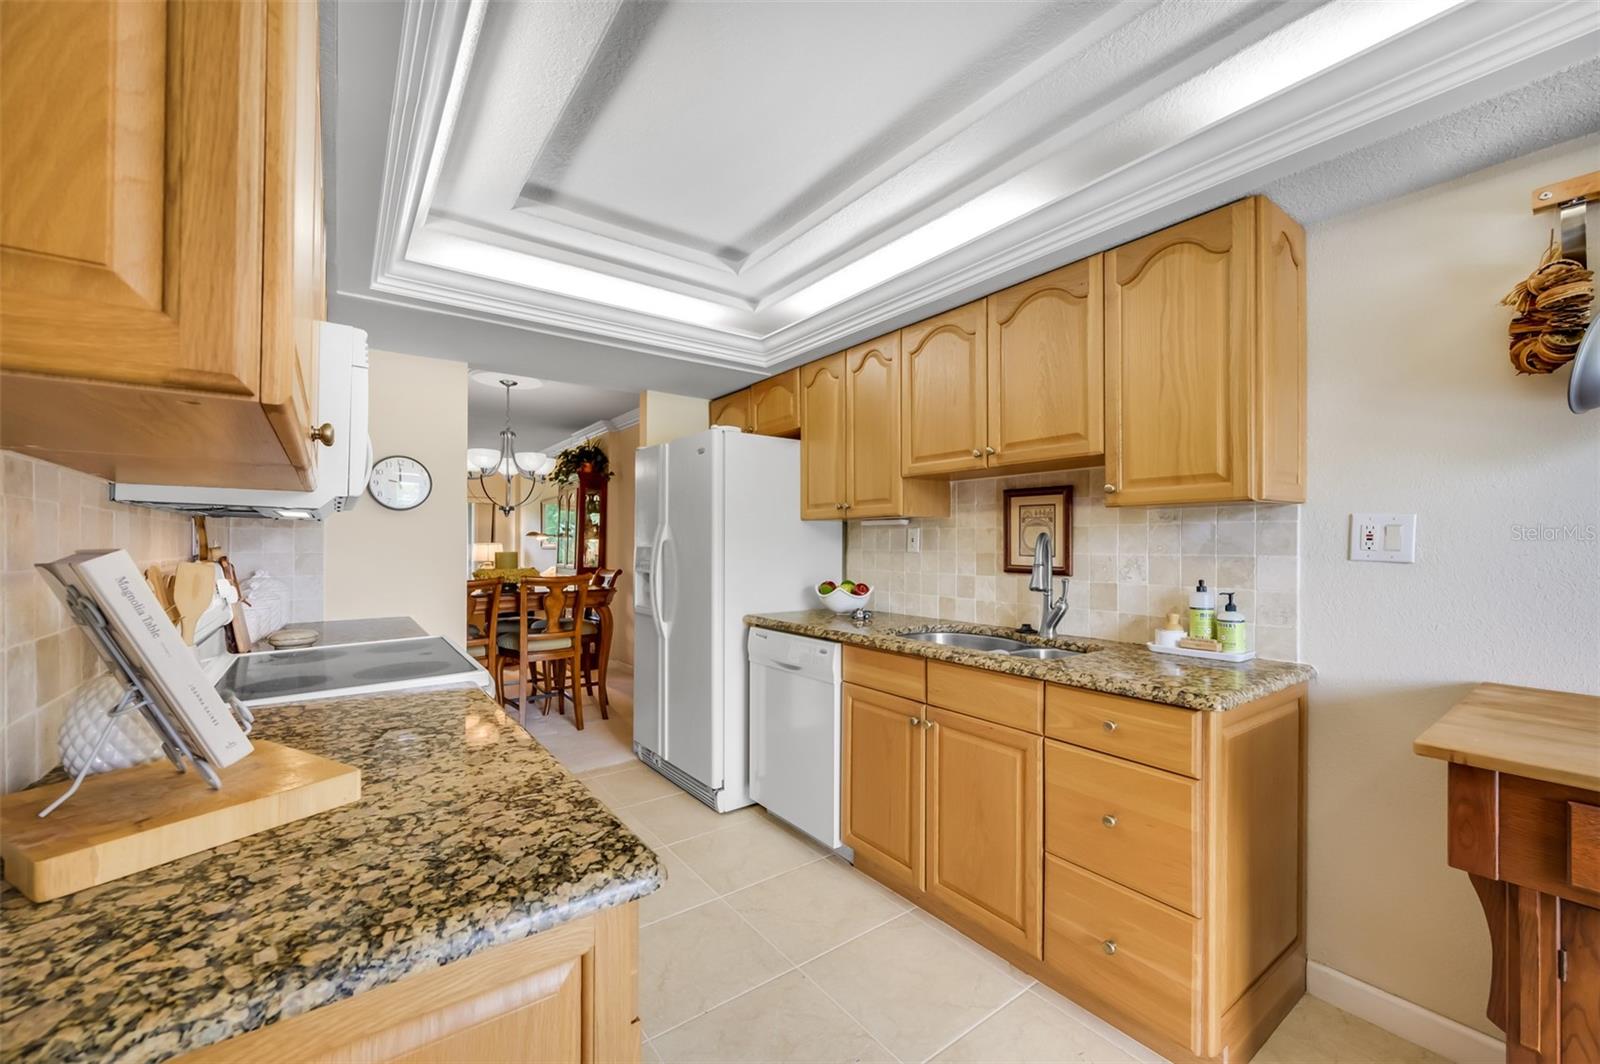 Solid wood kitchen cabinetry with granite countertops. Side by side refrigerator, dishwasher.